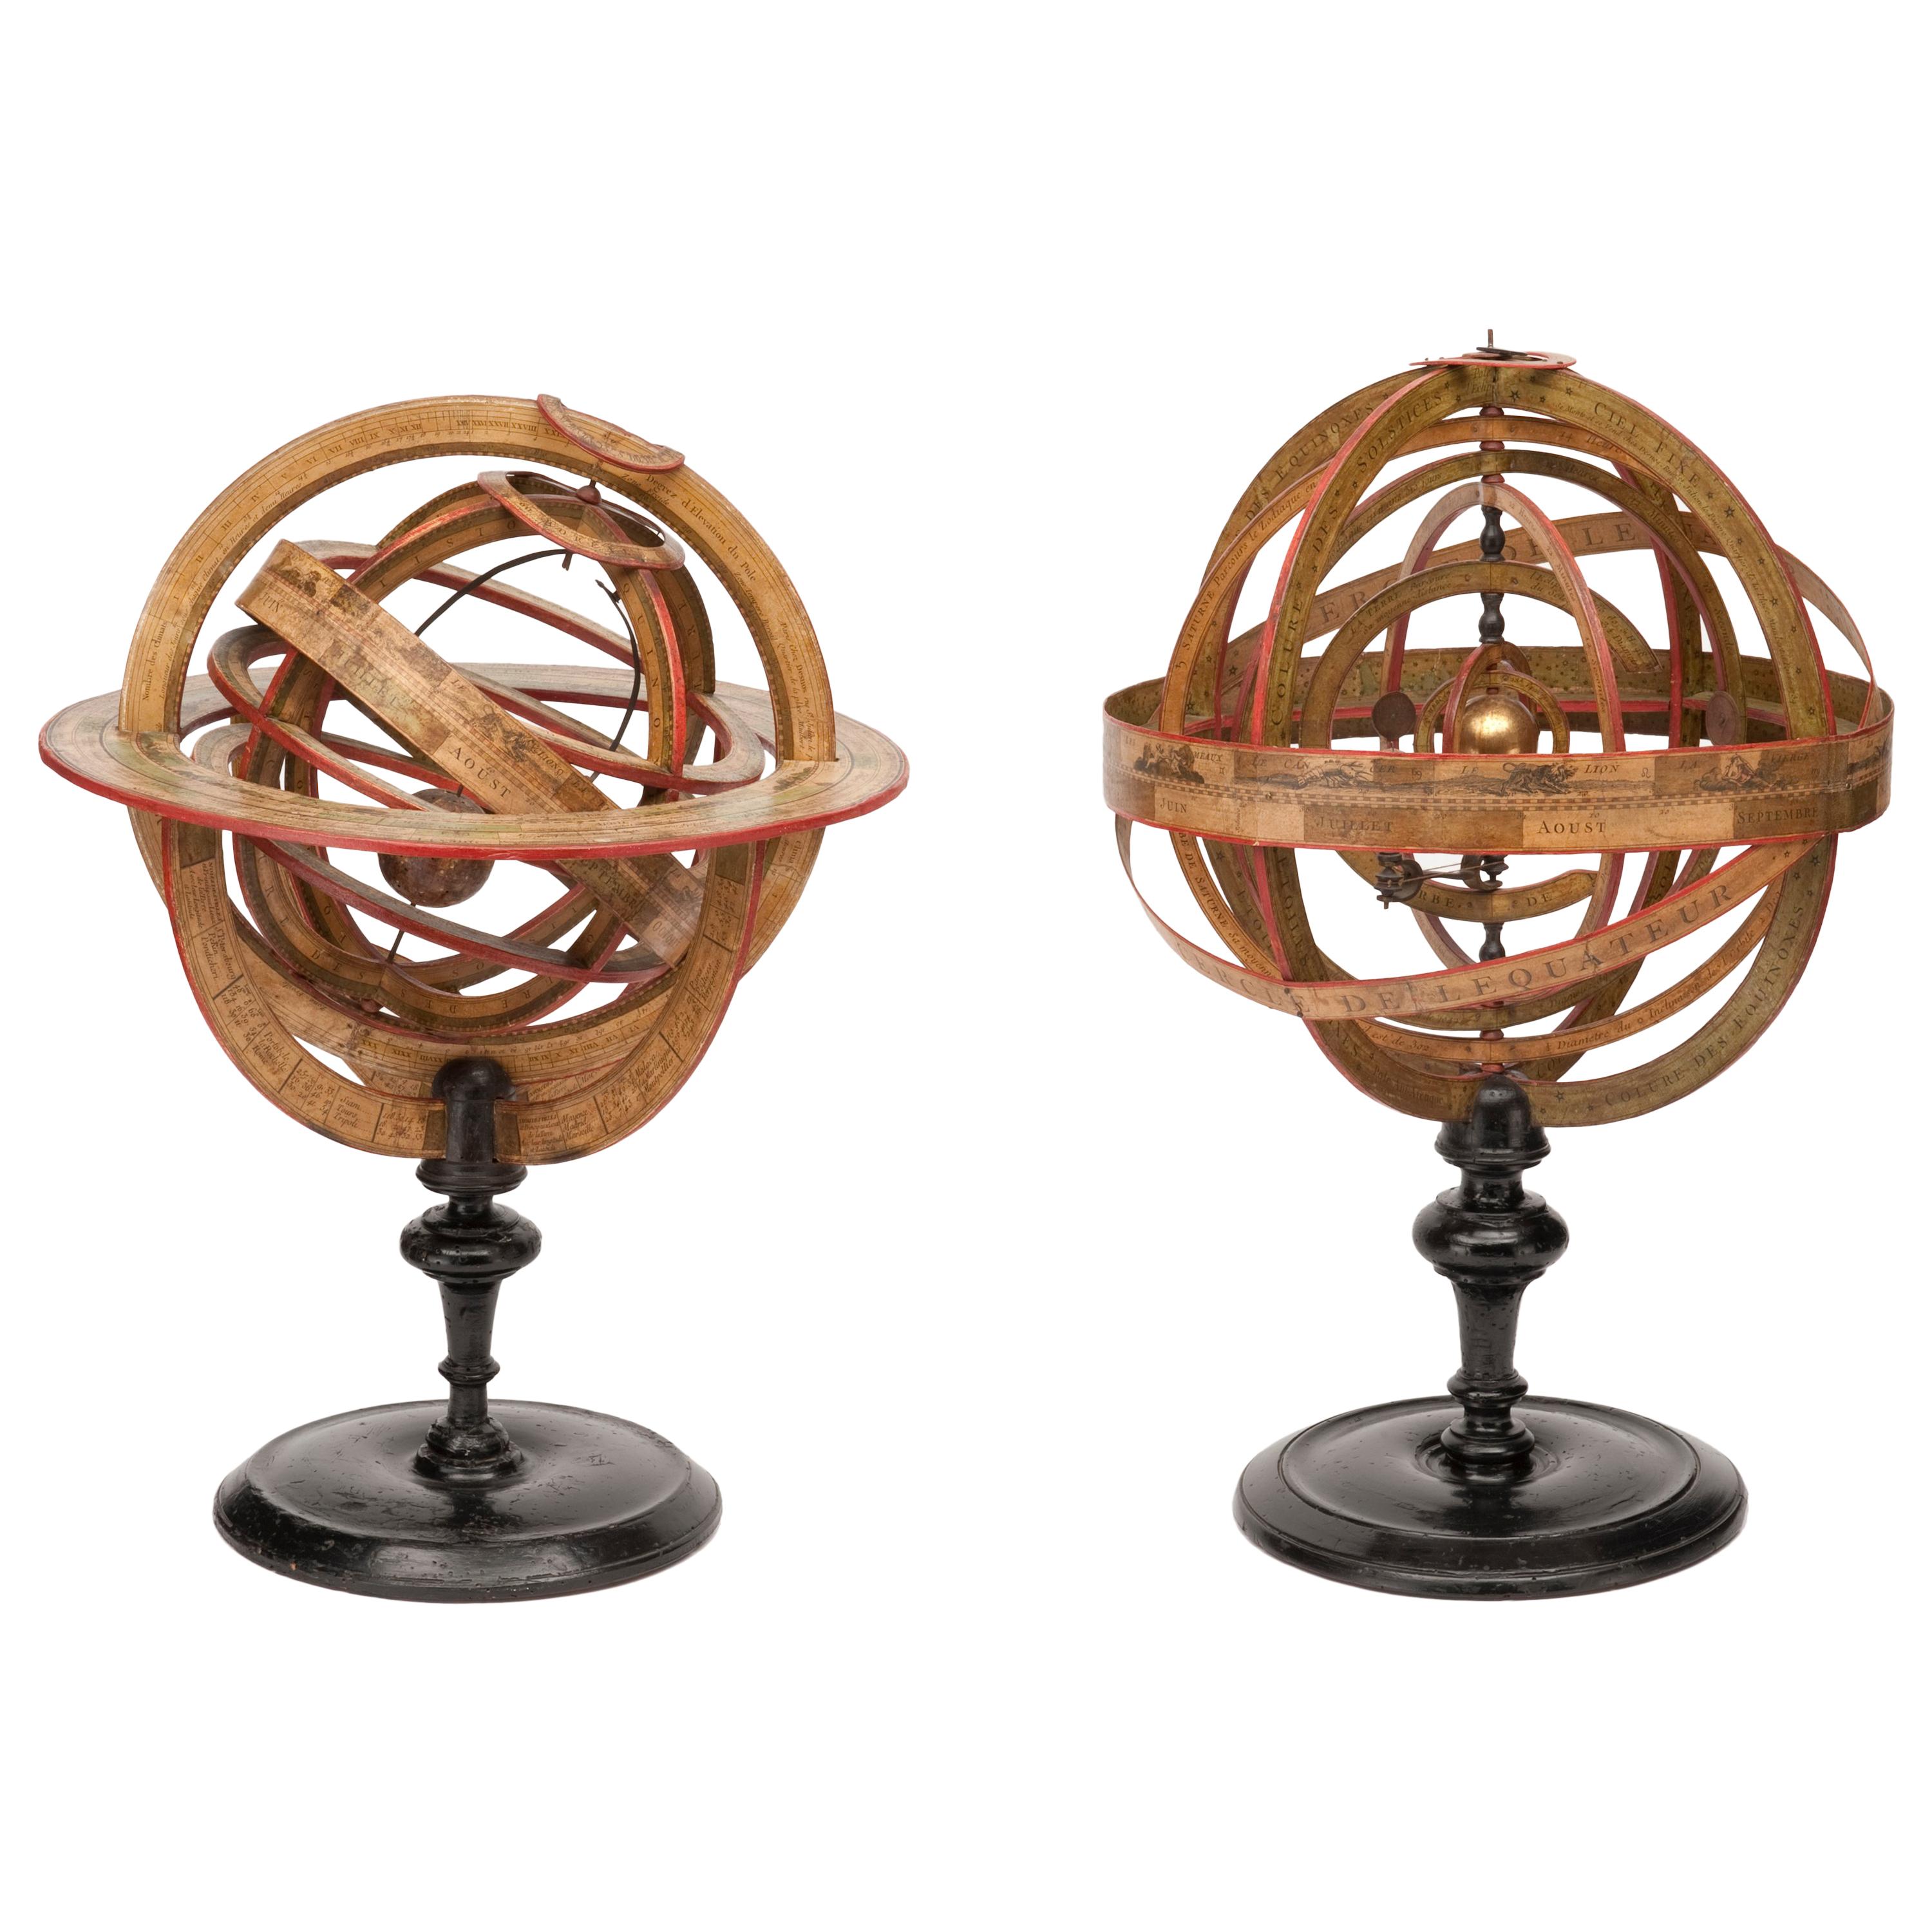 18th Century French Planetarium and Armillary Sphere by L.-C. Desnos, 1754